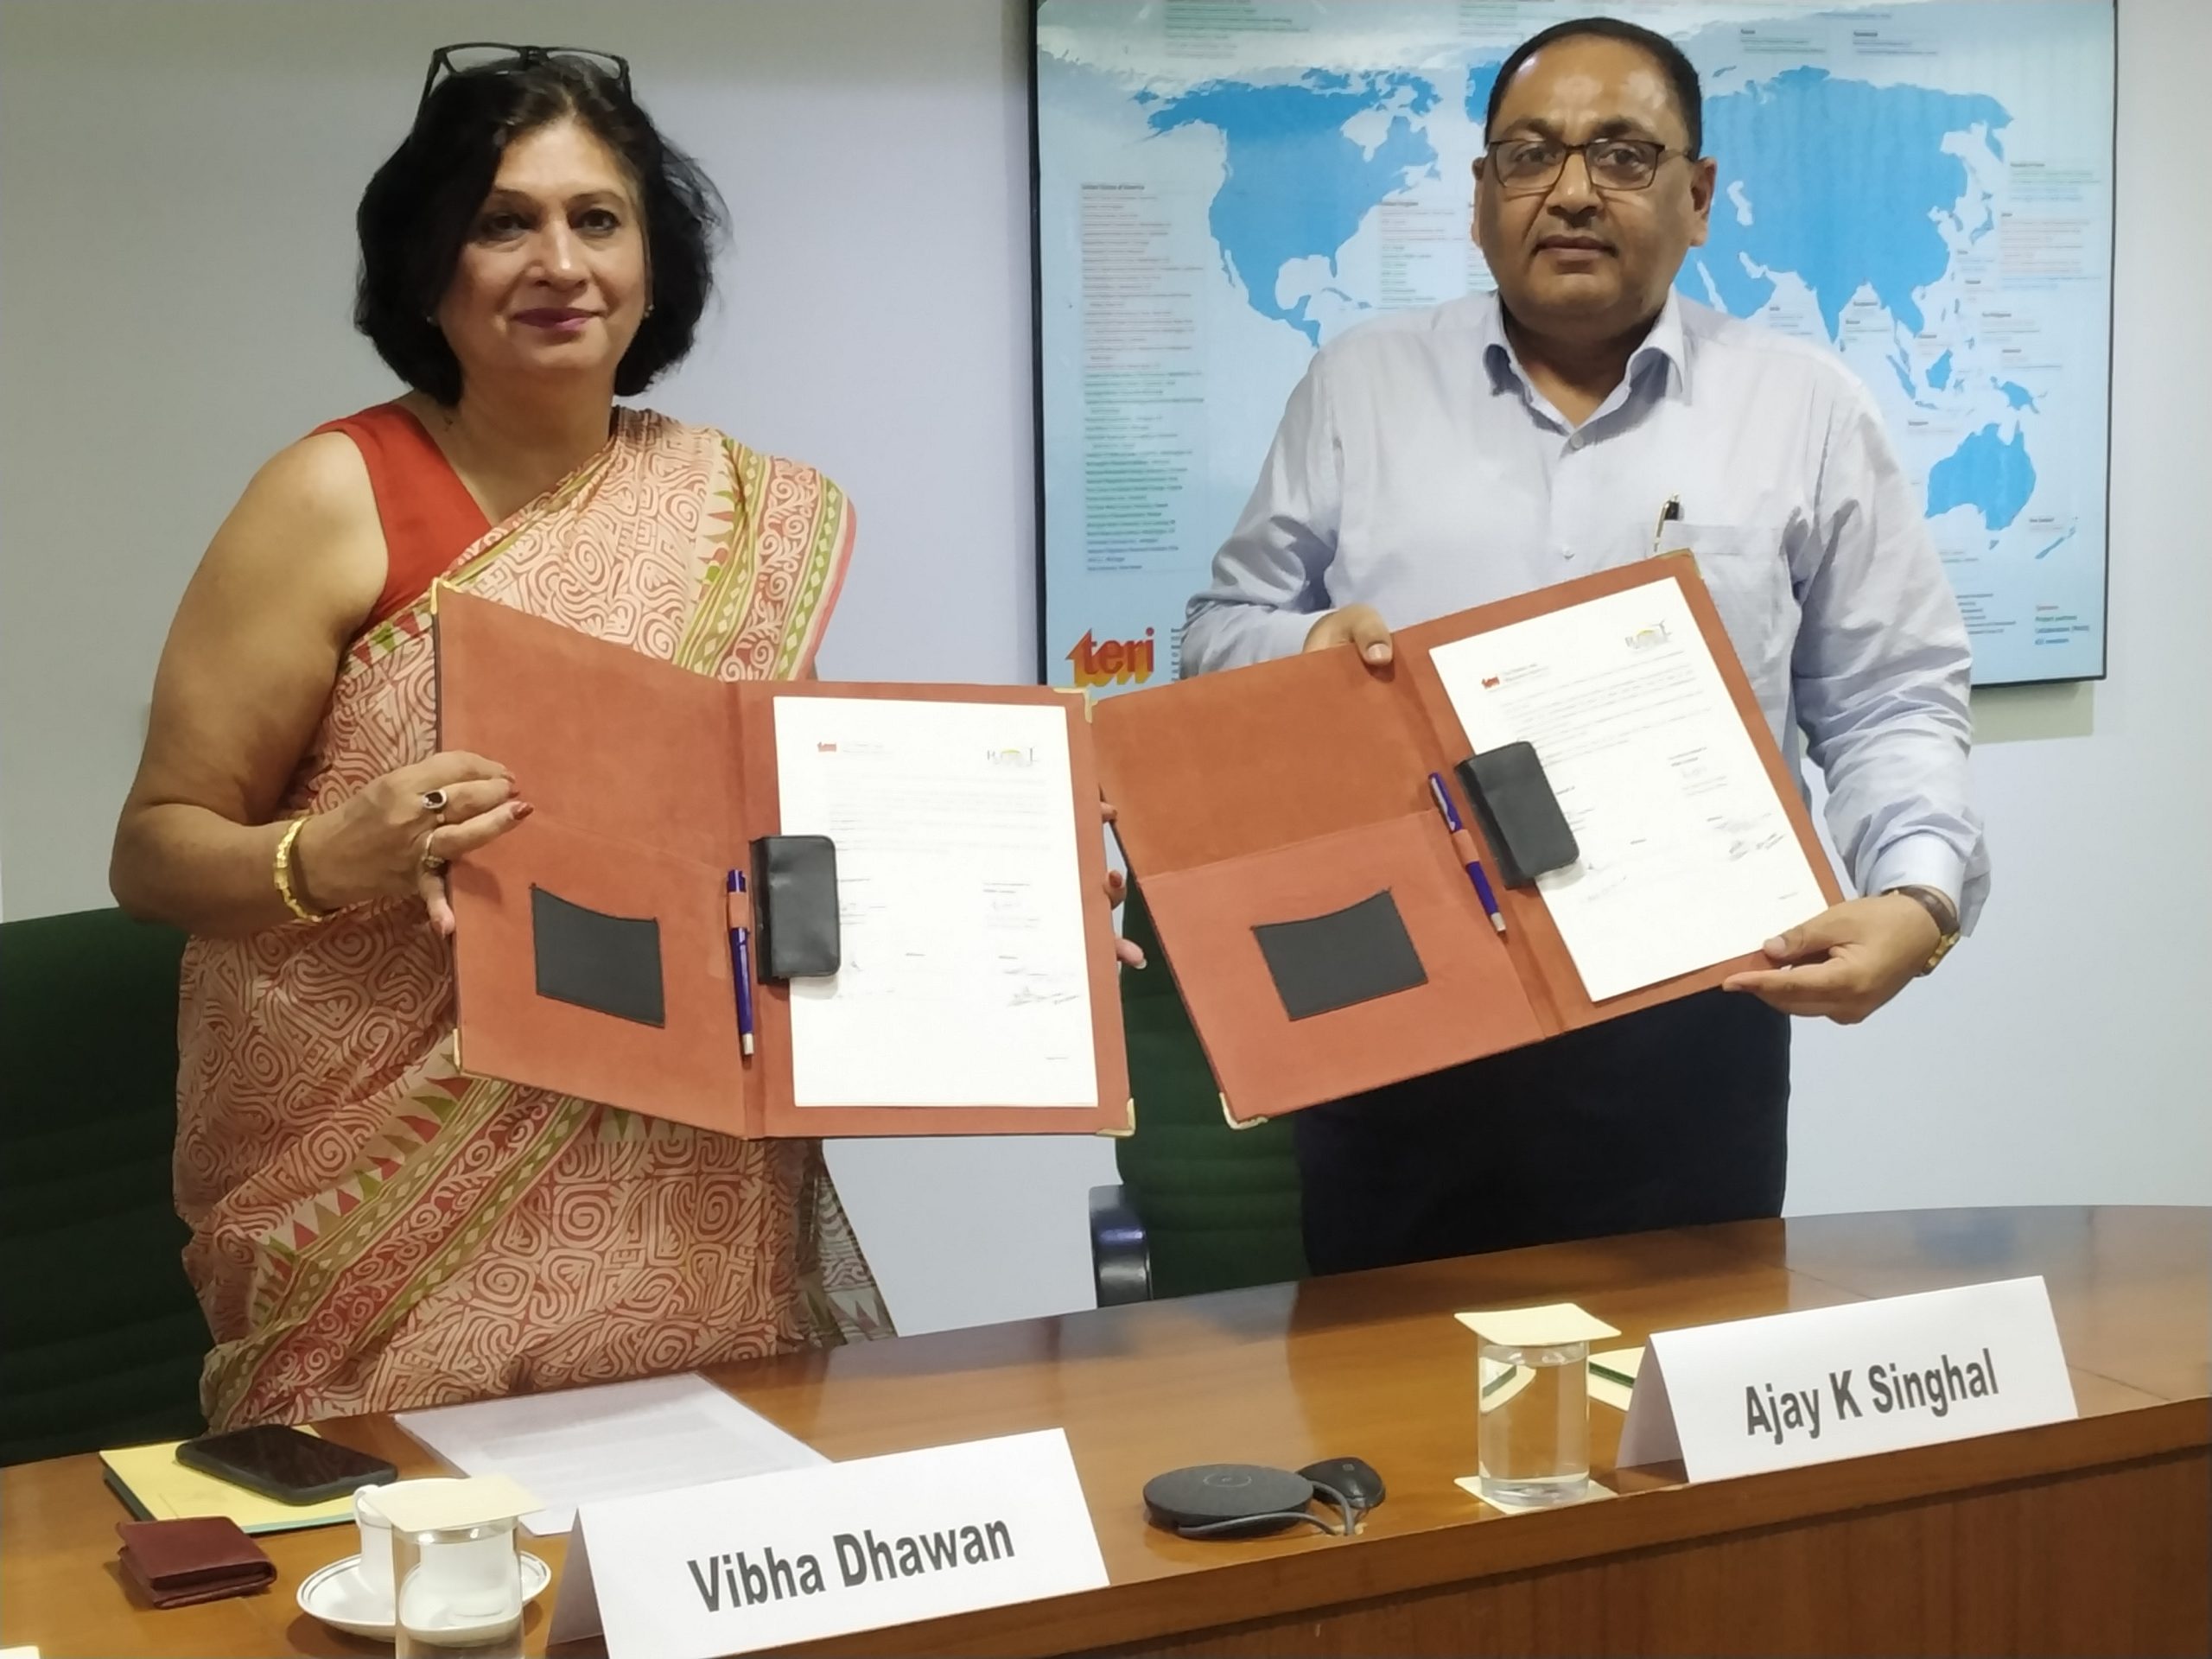 REMCL, TERI sign MoU to work on capacity building and development of renewable energy projects for Indian Railways – EQ Mag Pro